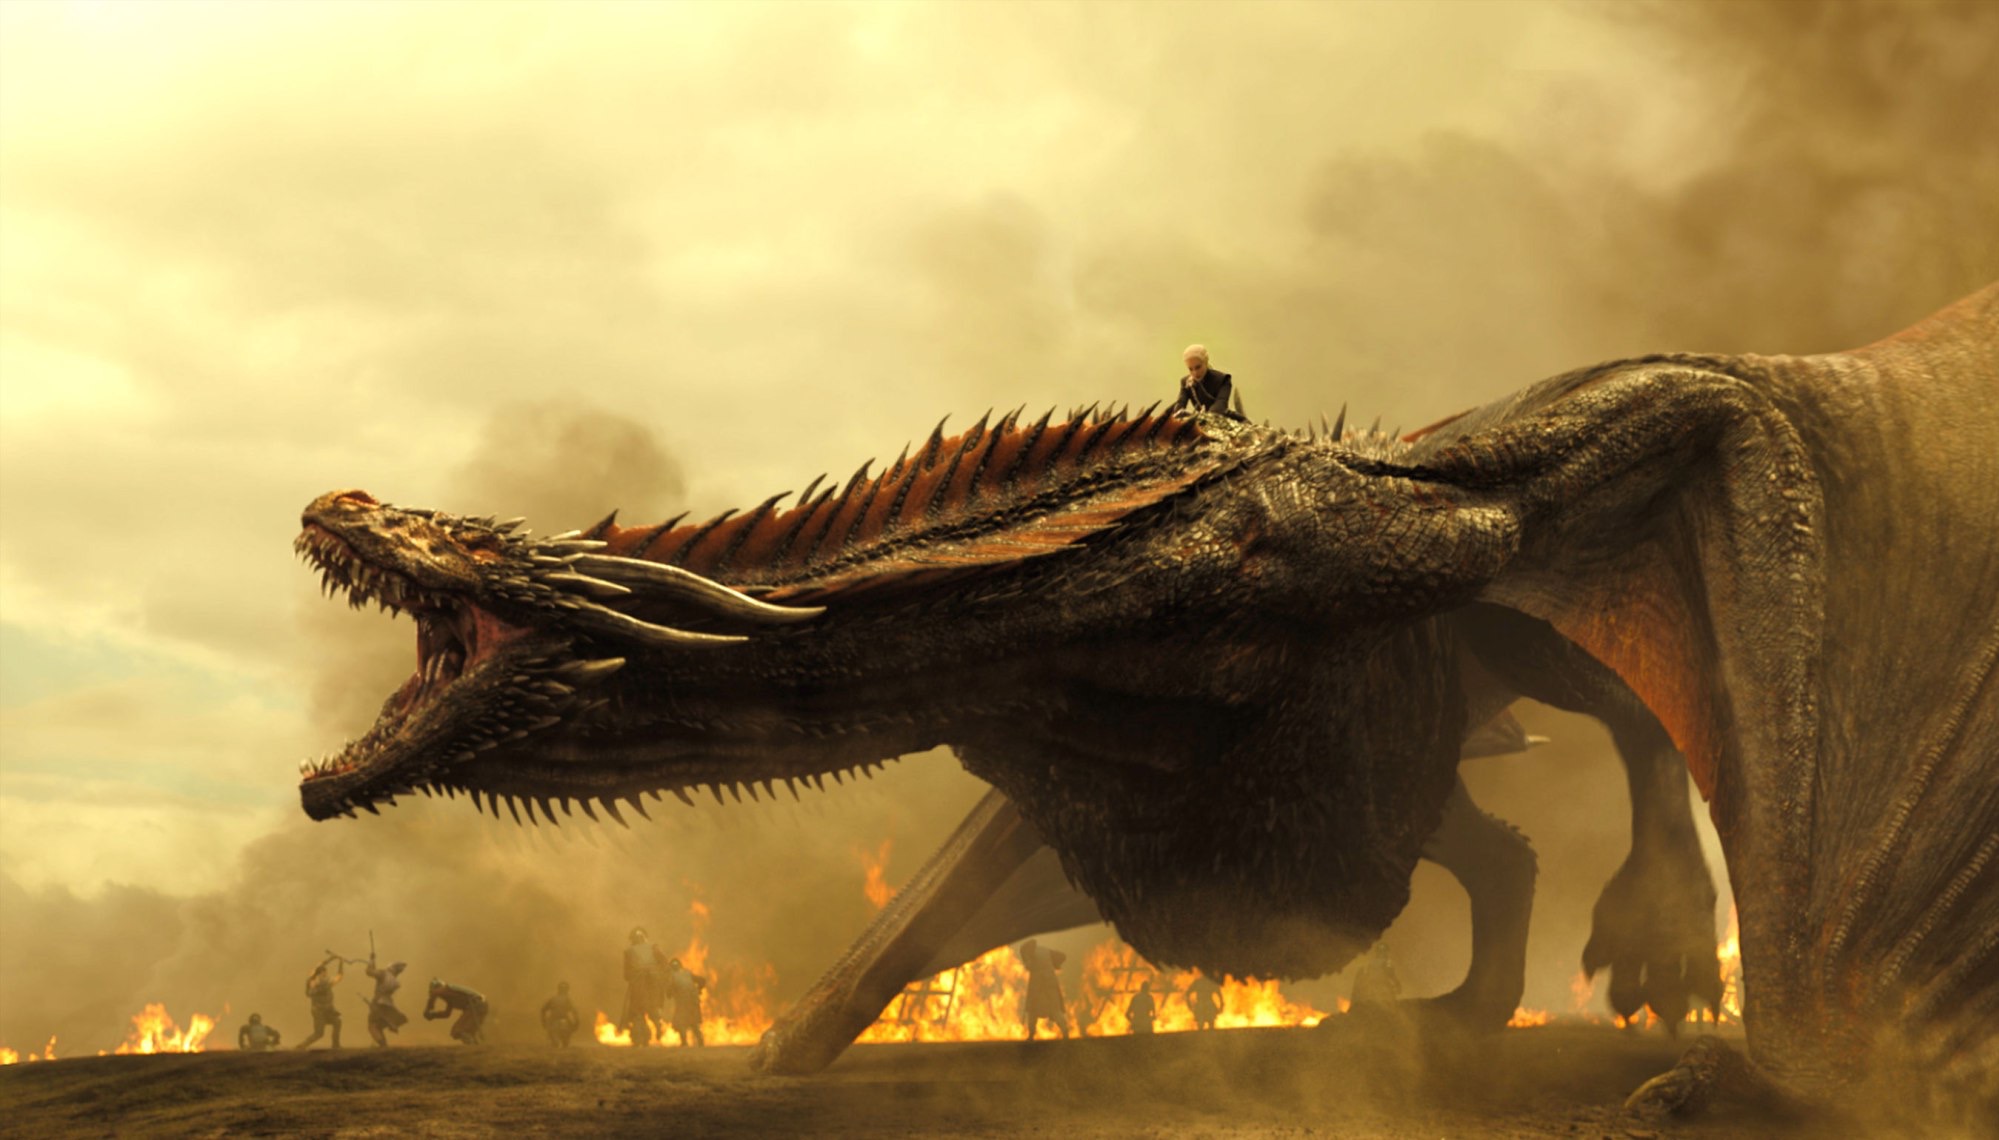 Drogon - A Wiki of Ice and Fire